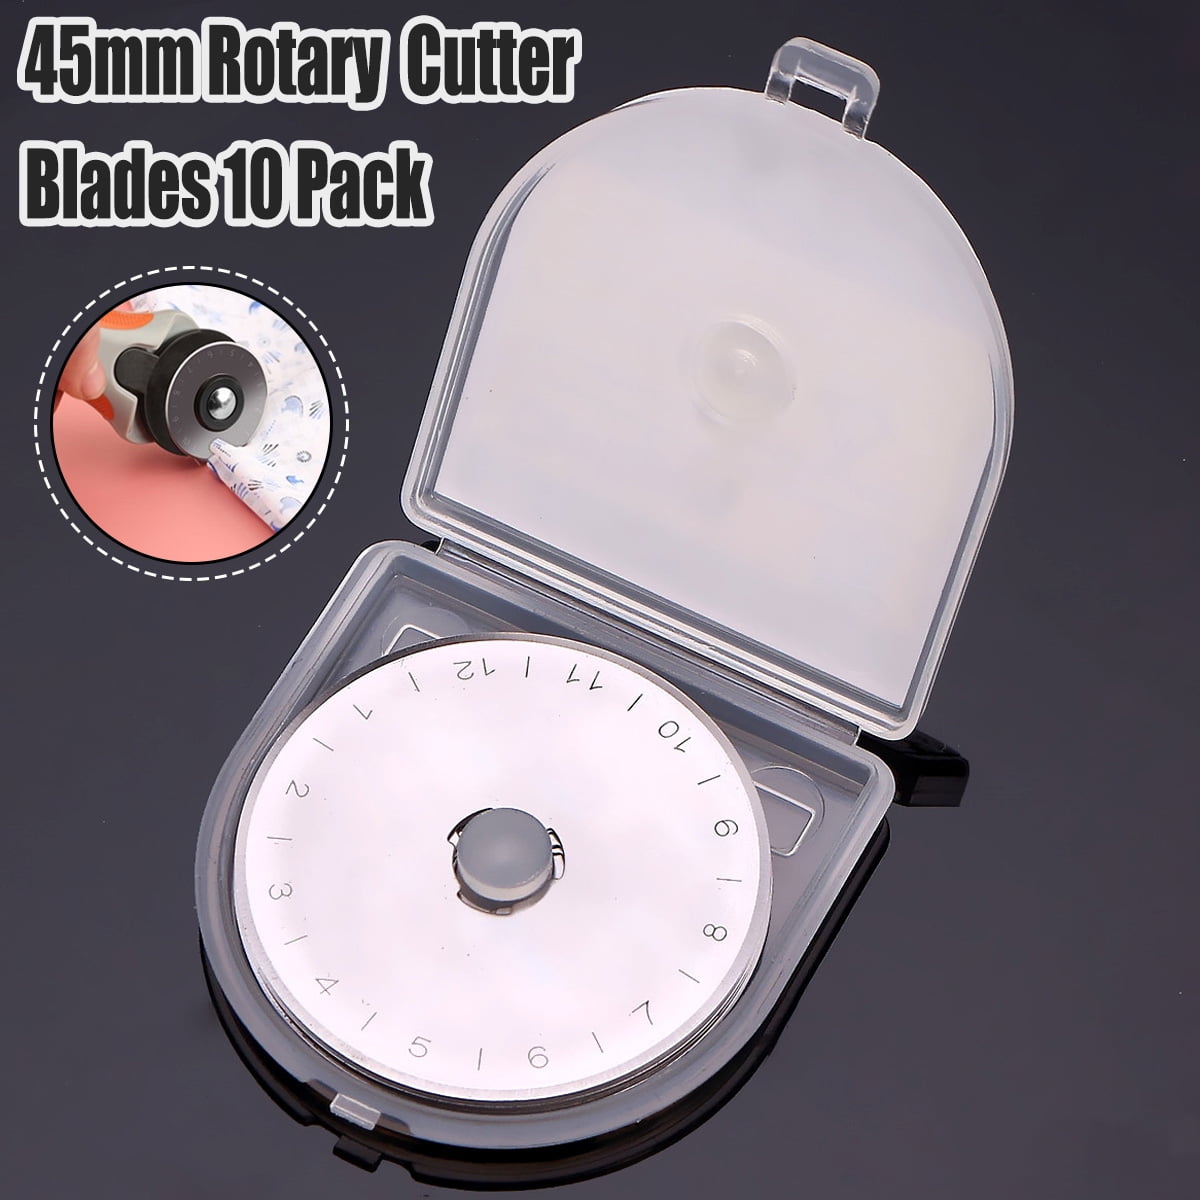 45mm Rotary Cutter Refill Blade Sewing Quilting Photos Fits Olfa Fiskars Cutters 